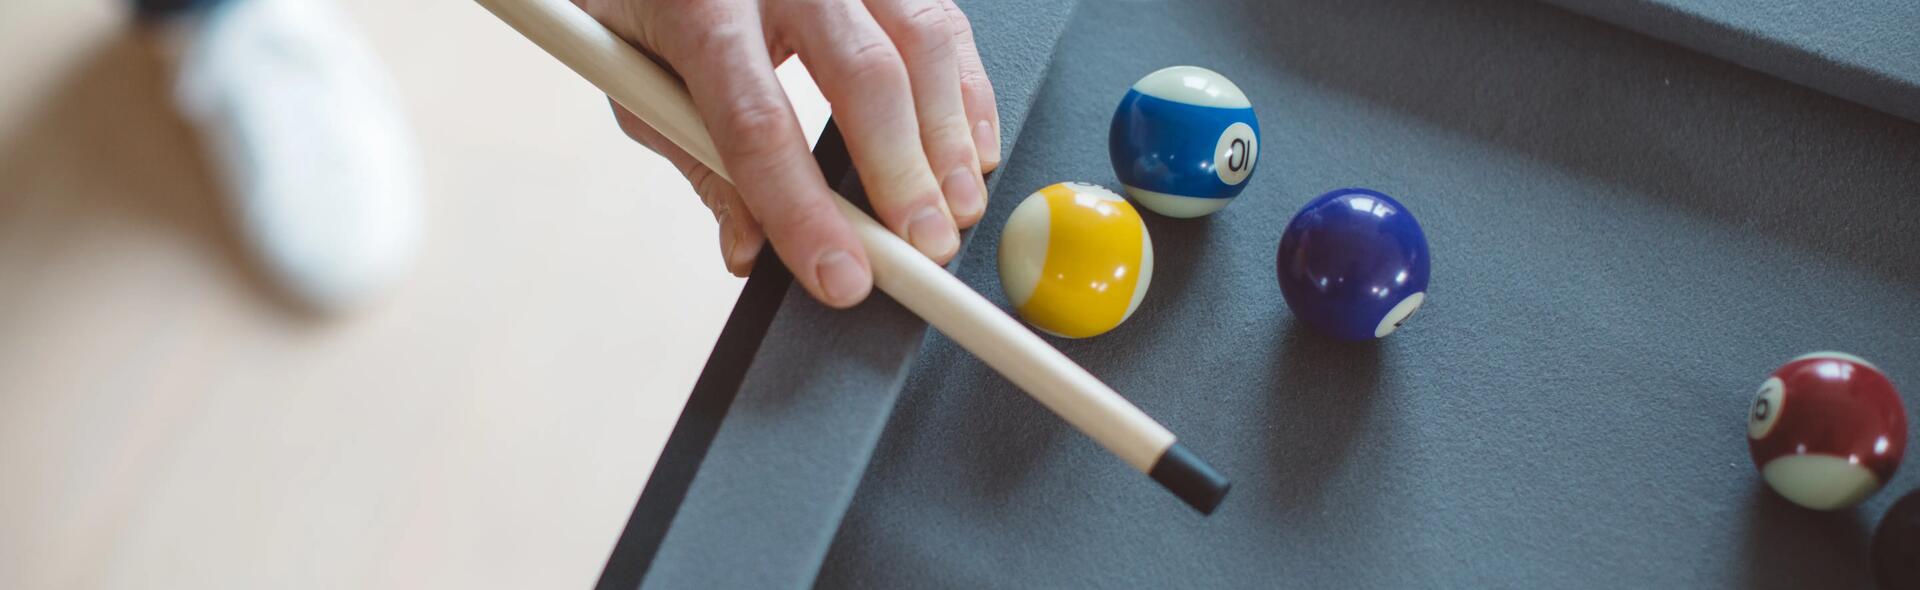 Everything about billiards